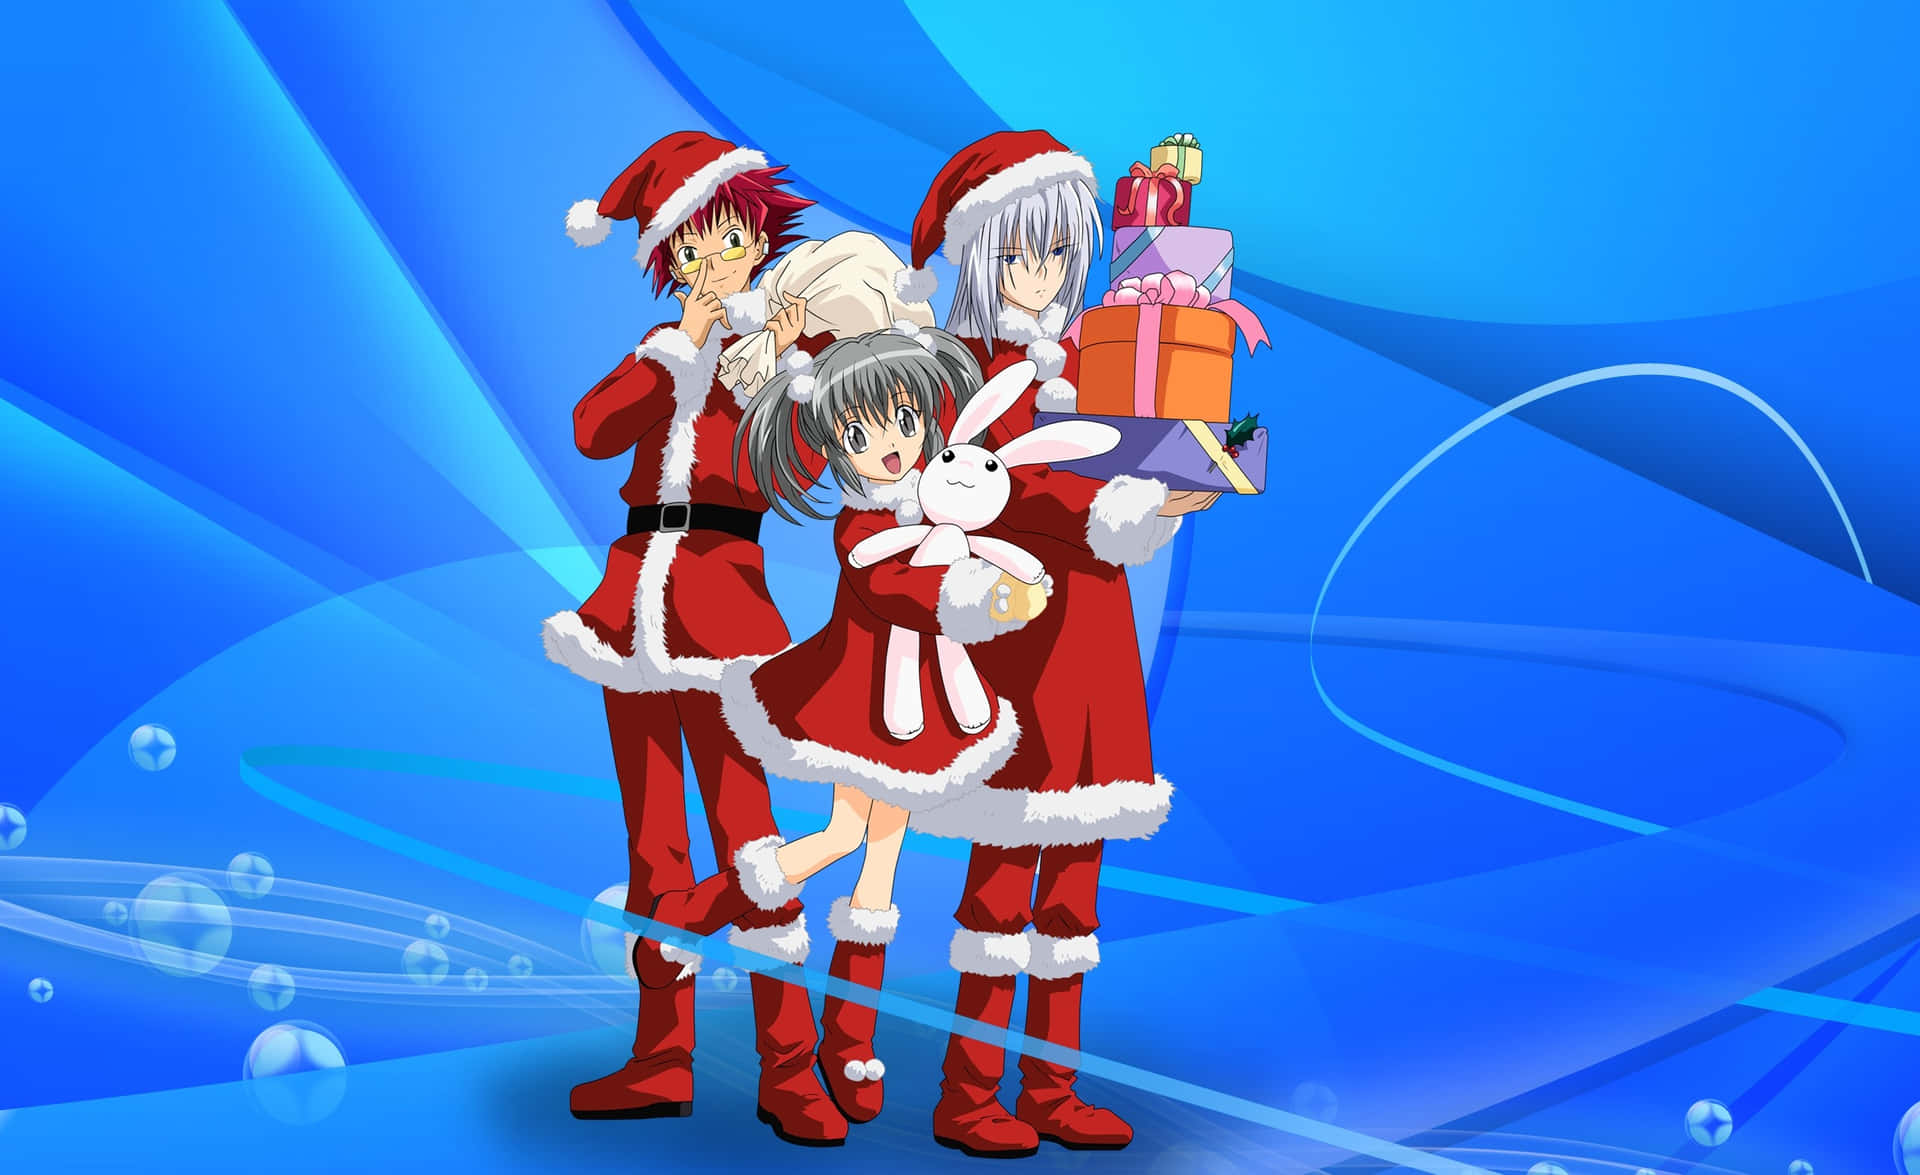 A Group Of People In Santa Claus Costumes